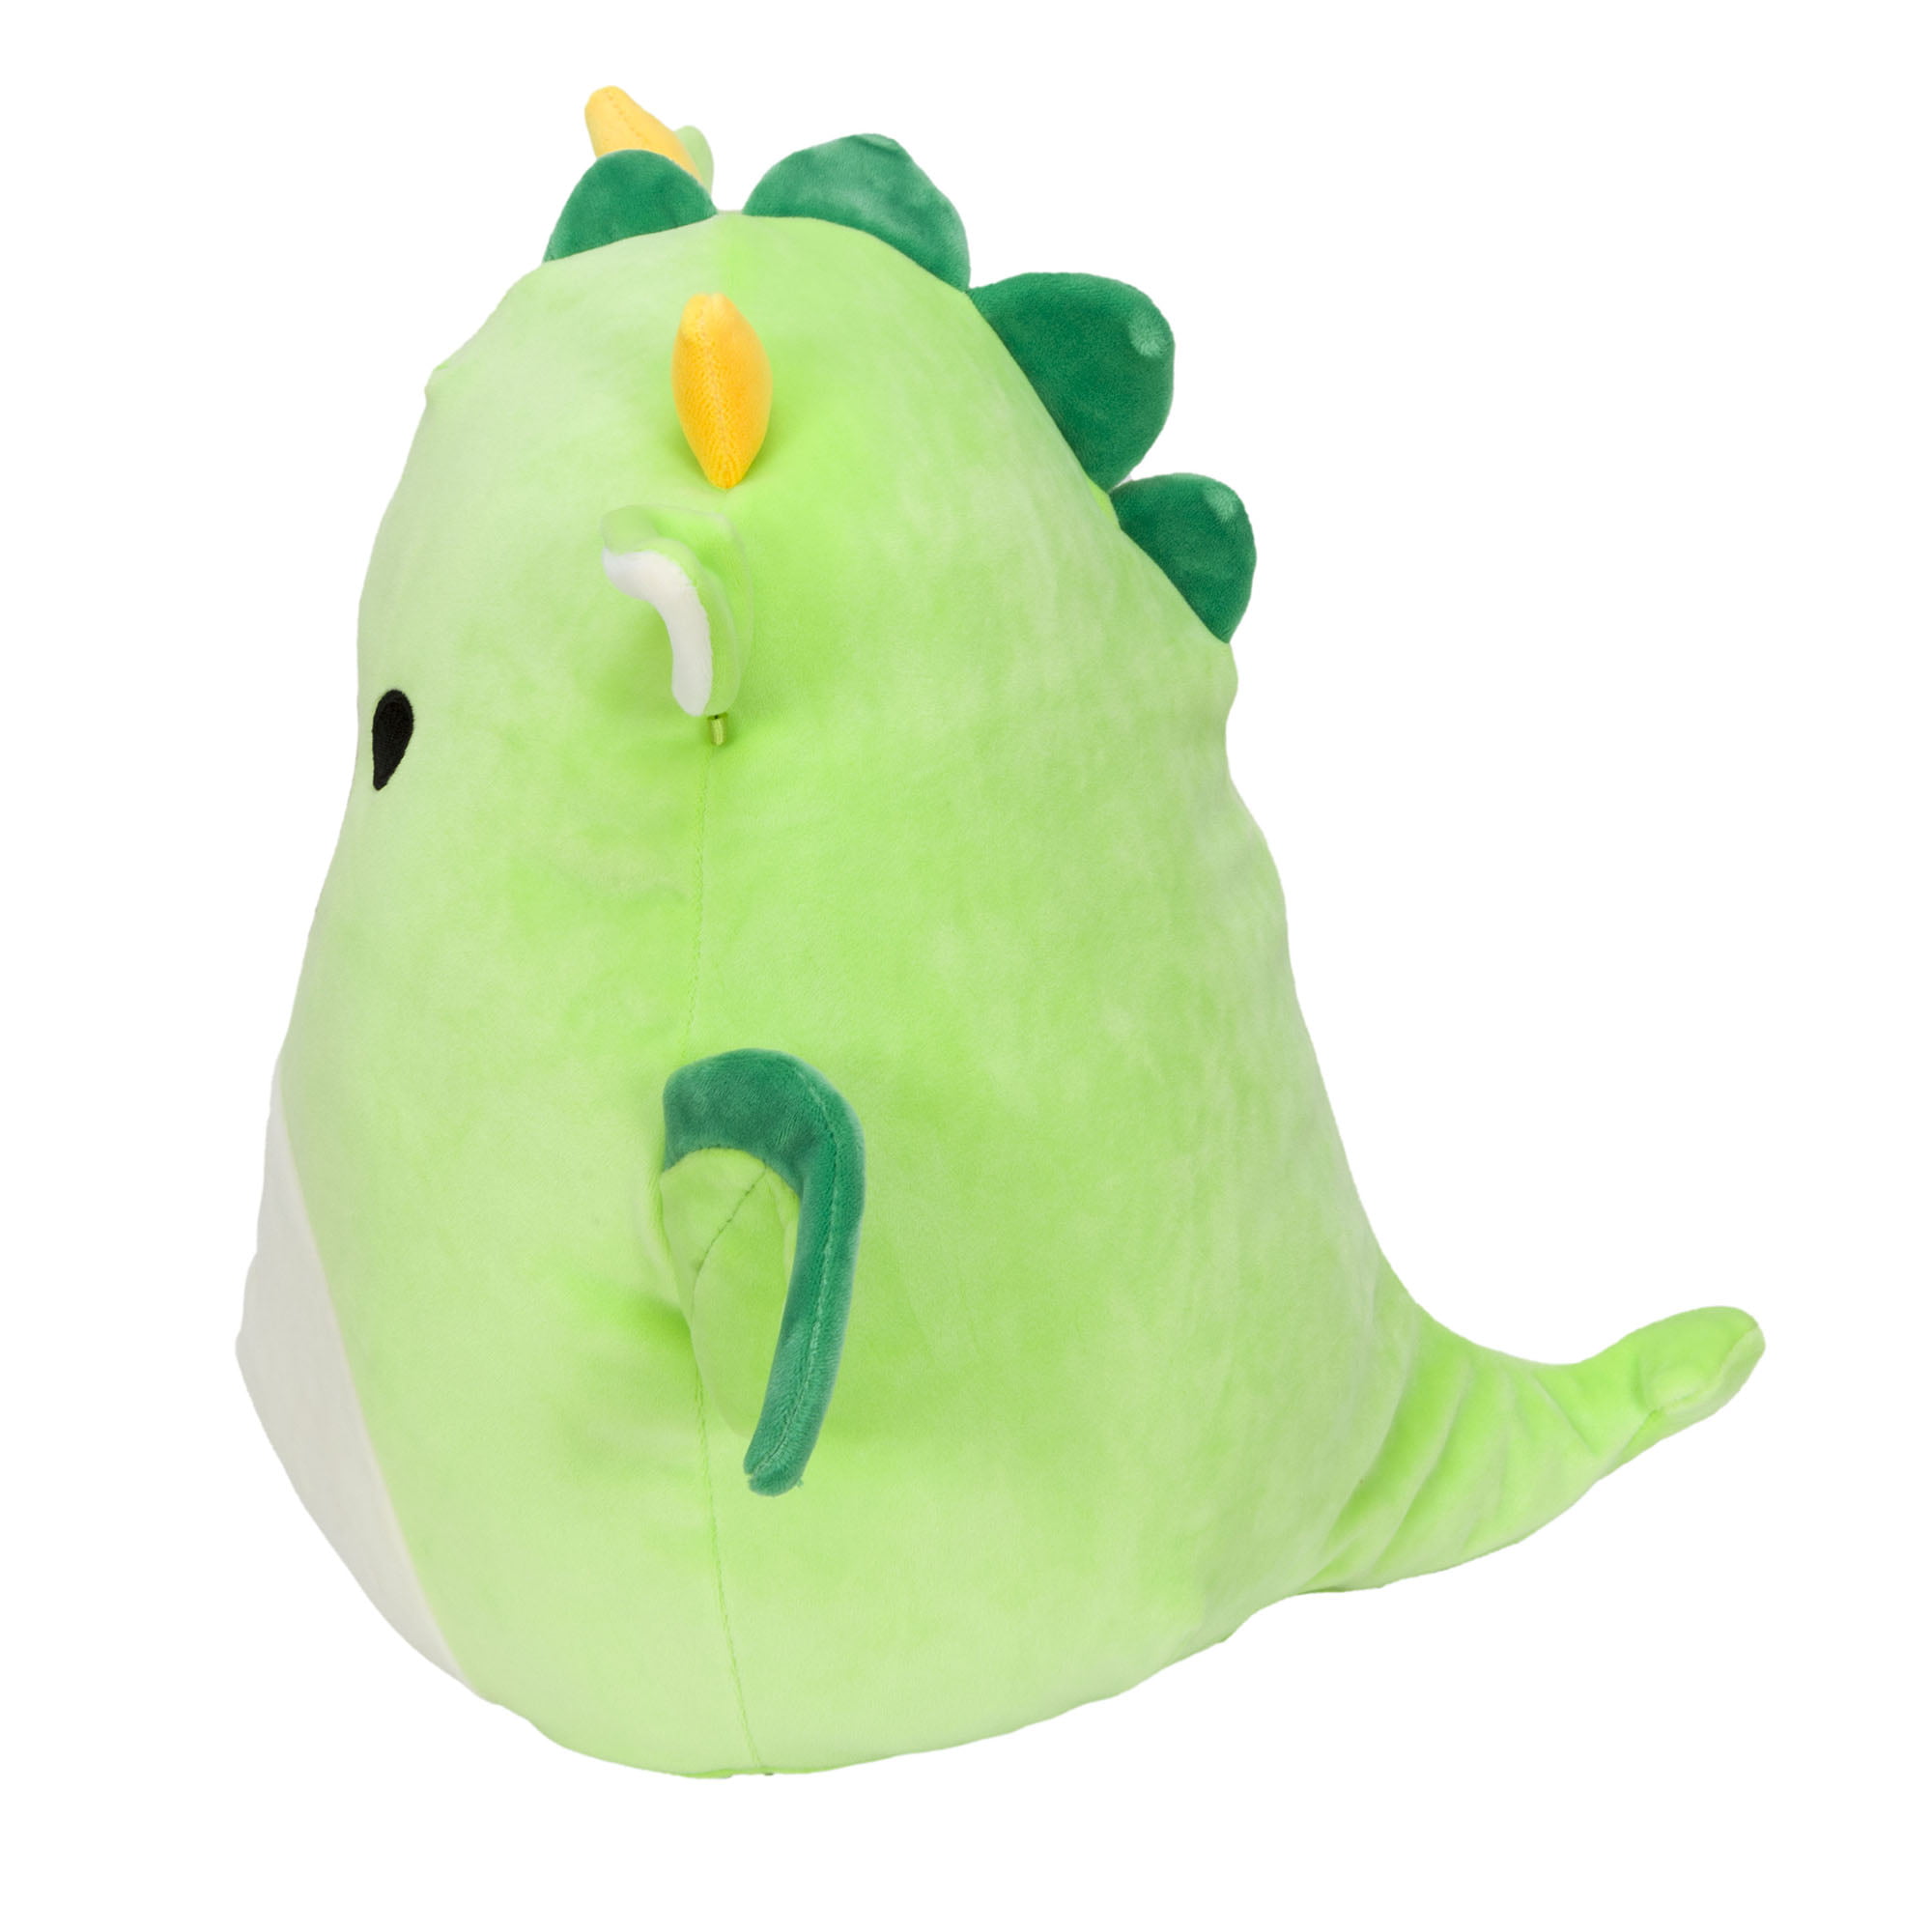 Squishmallows Official Kellytoy Plush 12 inch Dragon - One Of Two